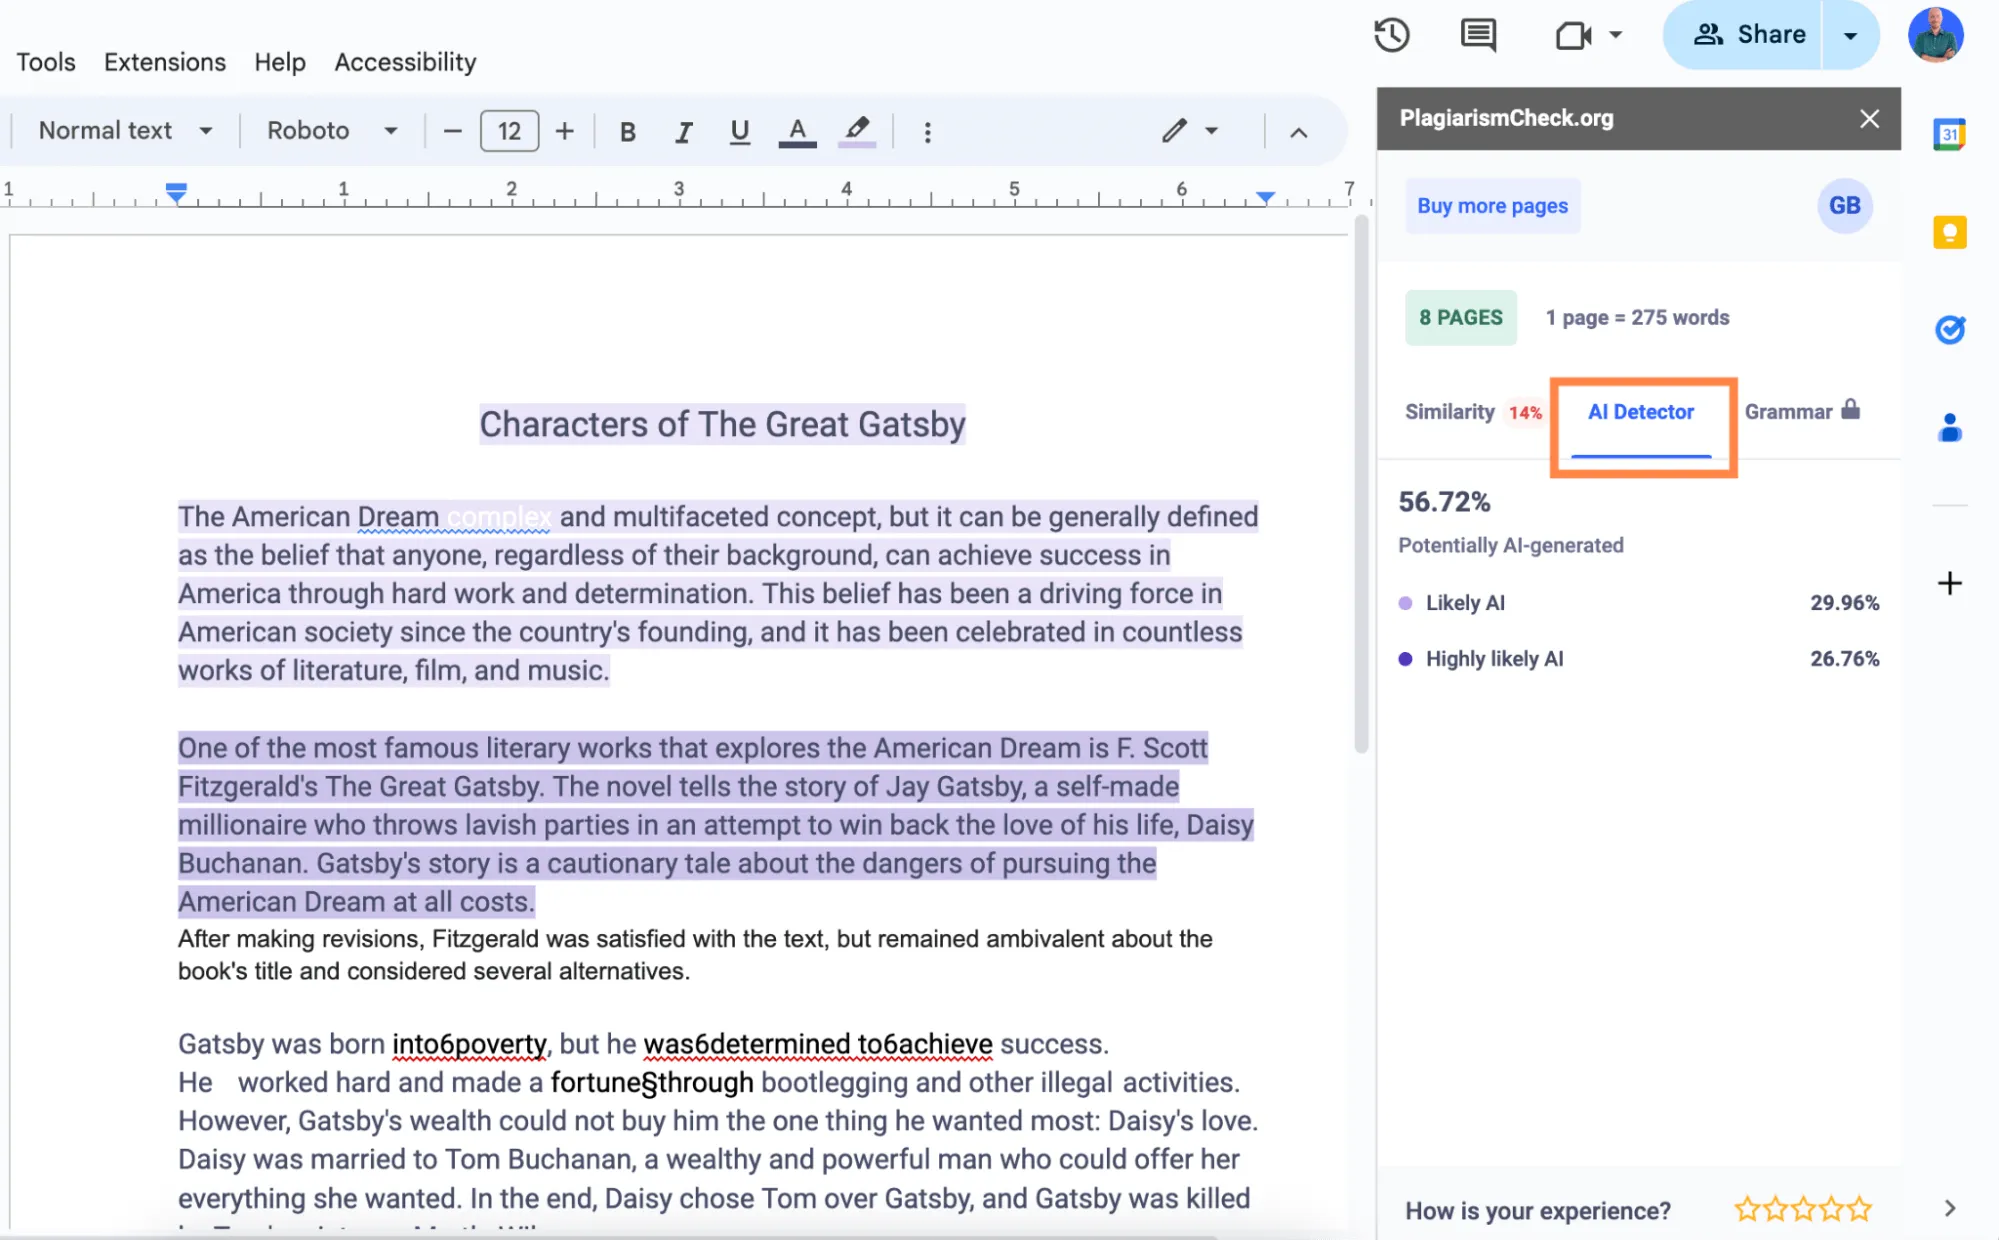 To see what sentences AI detector Google Docs flagged as potentially AI-generated